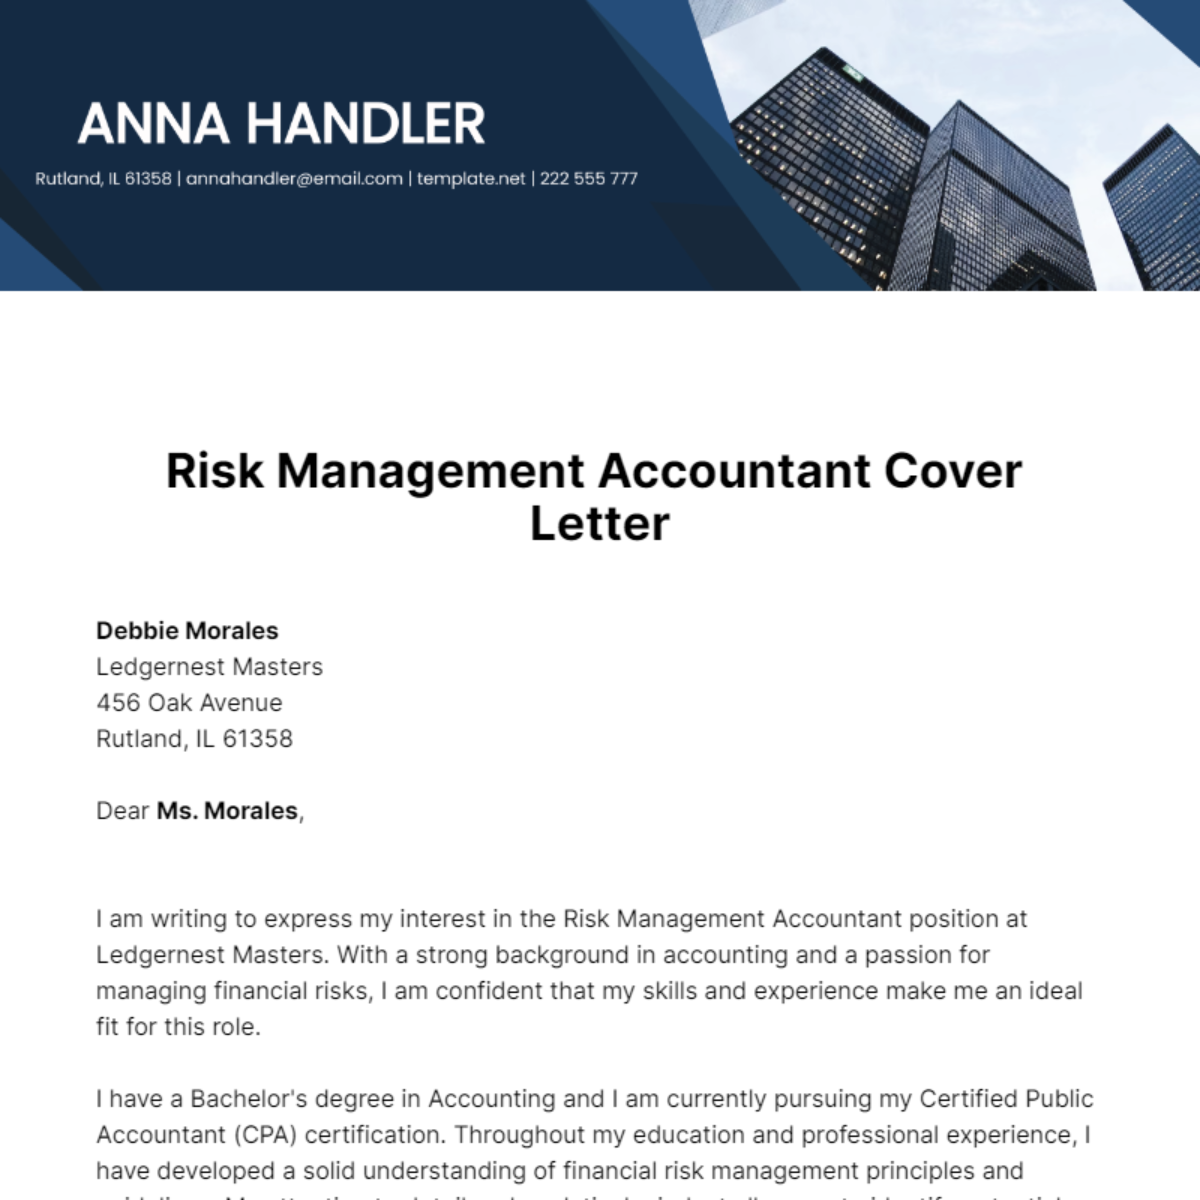 Risk Management Accountant Cover Letter Template